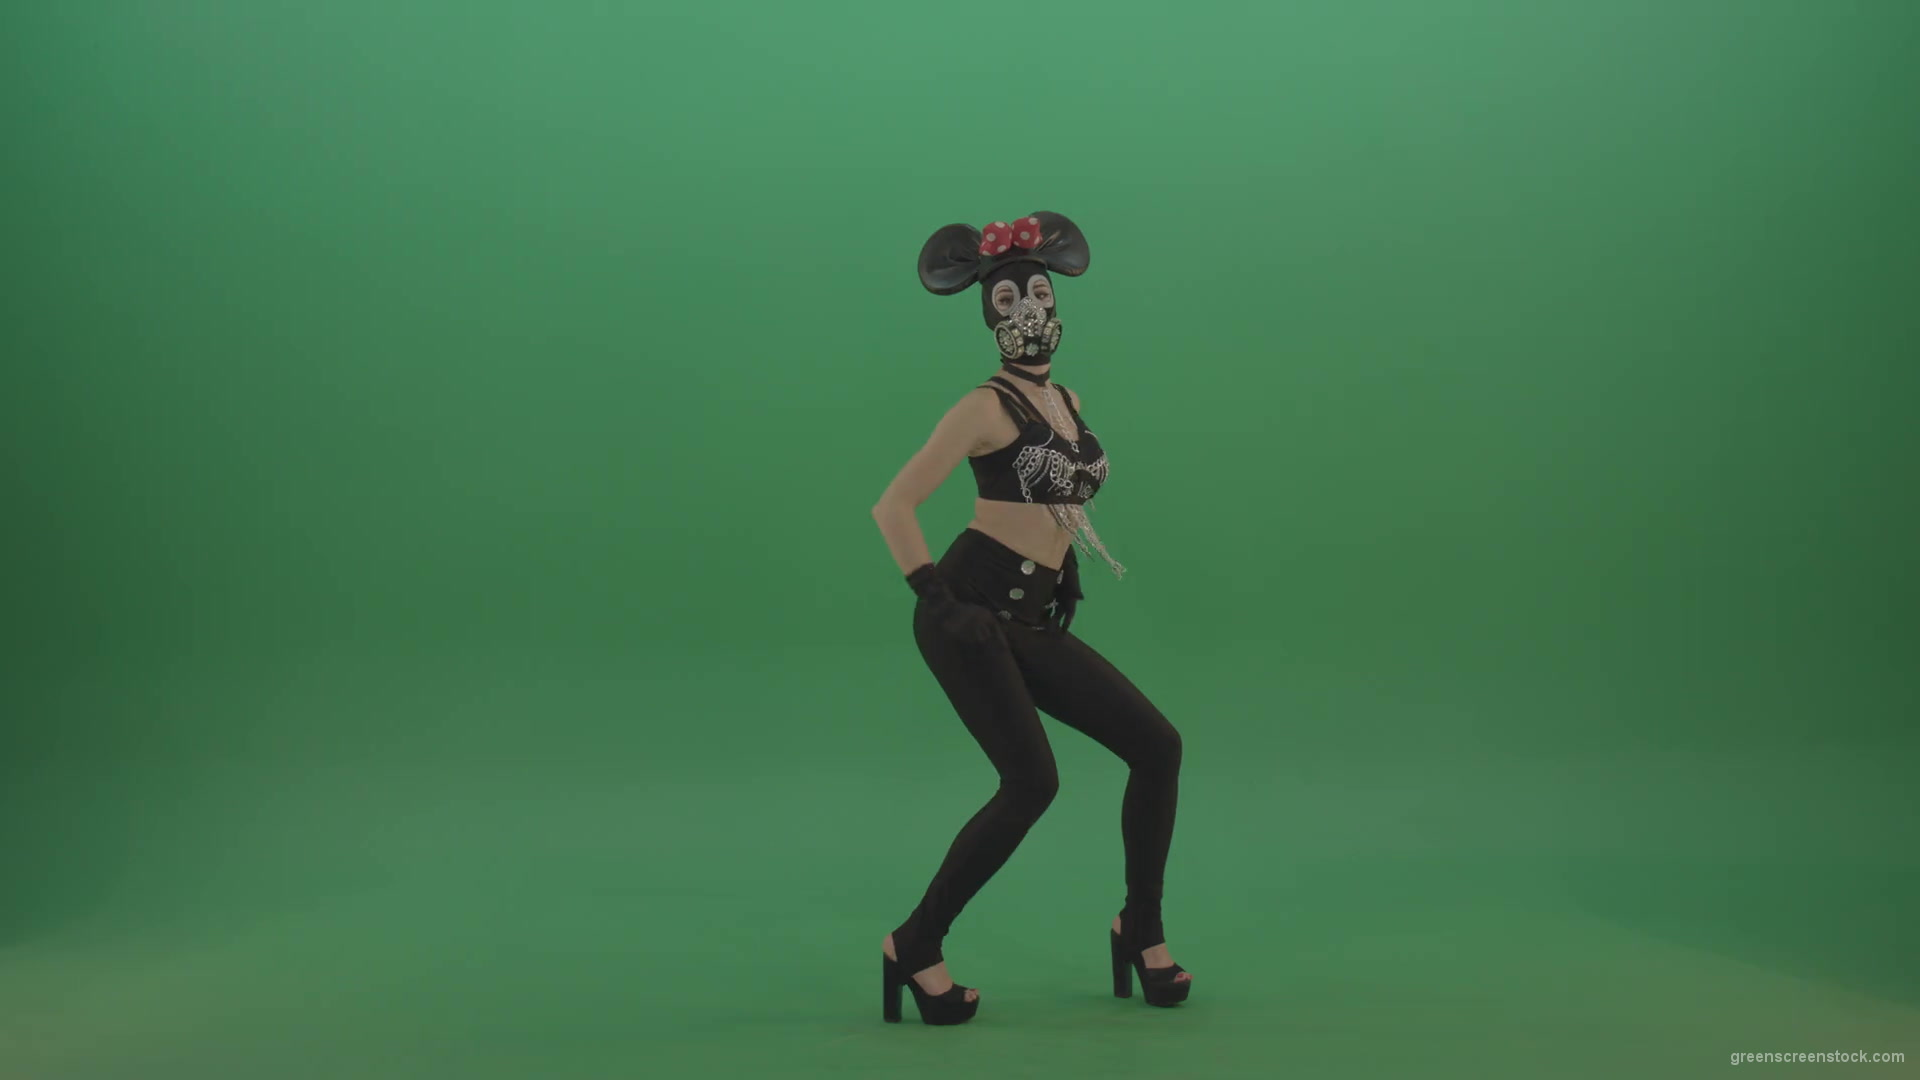 Sexy-dancing-mouse-girl-slowly-dance-in-mask-on-green-screen-1920_006 Green Screen Stock